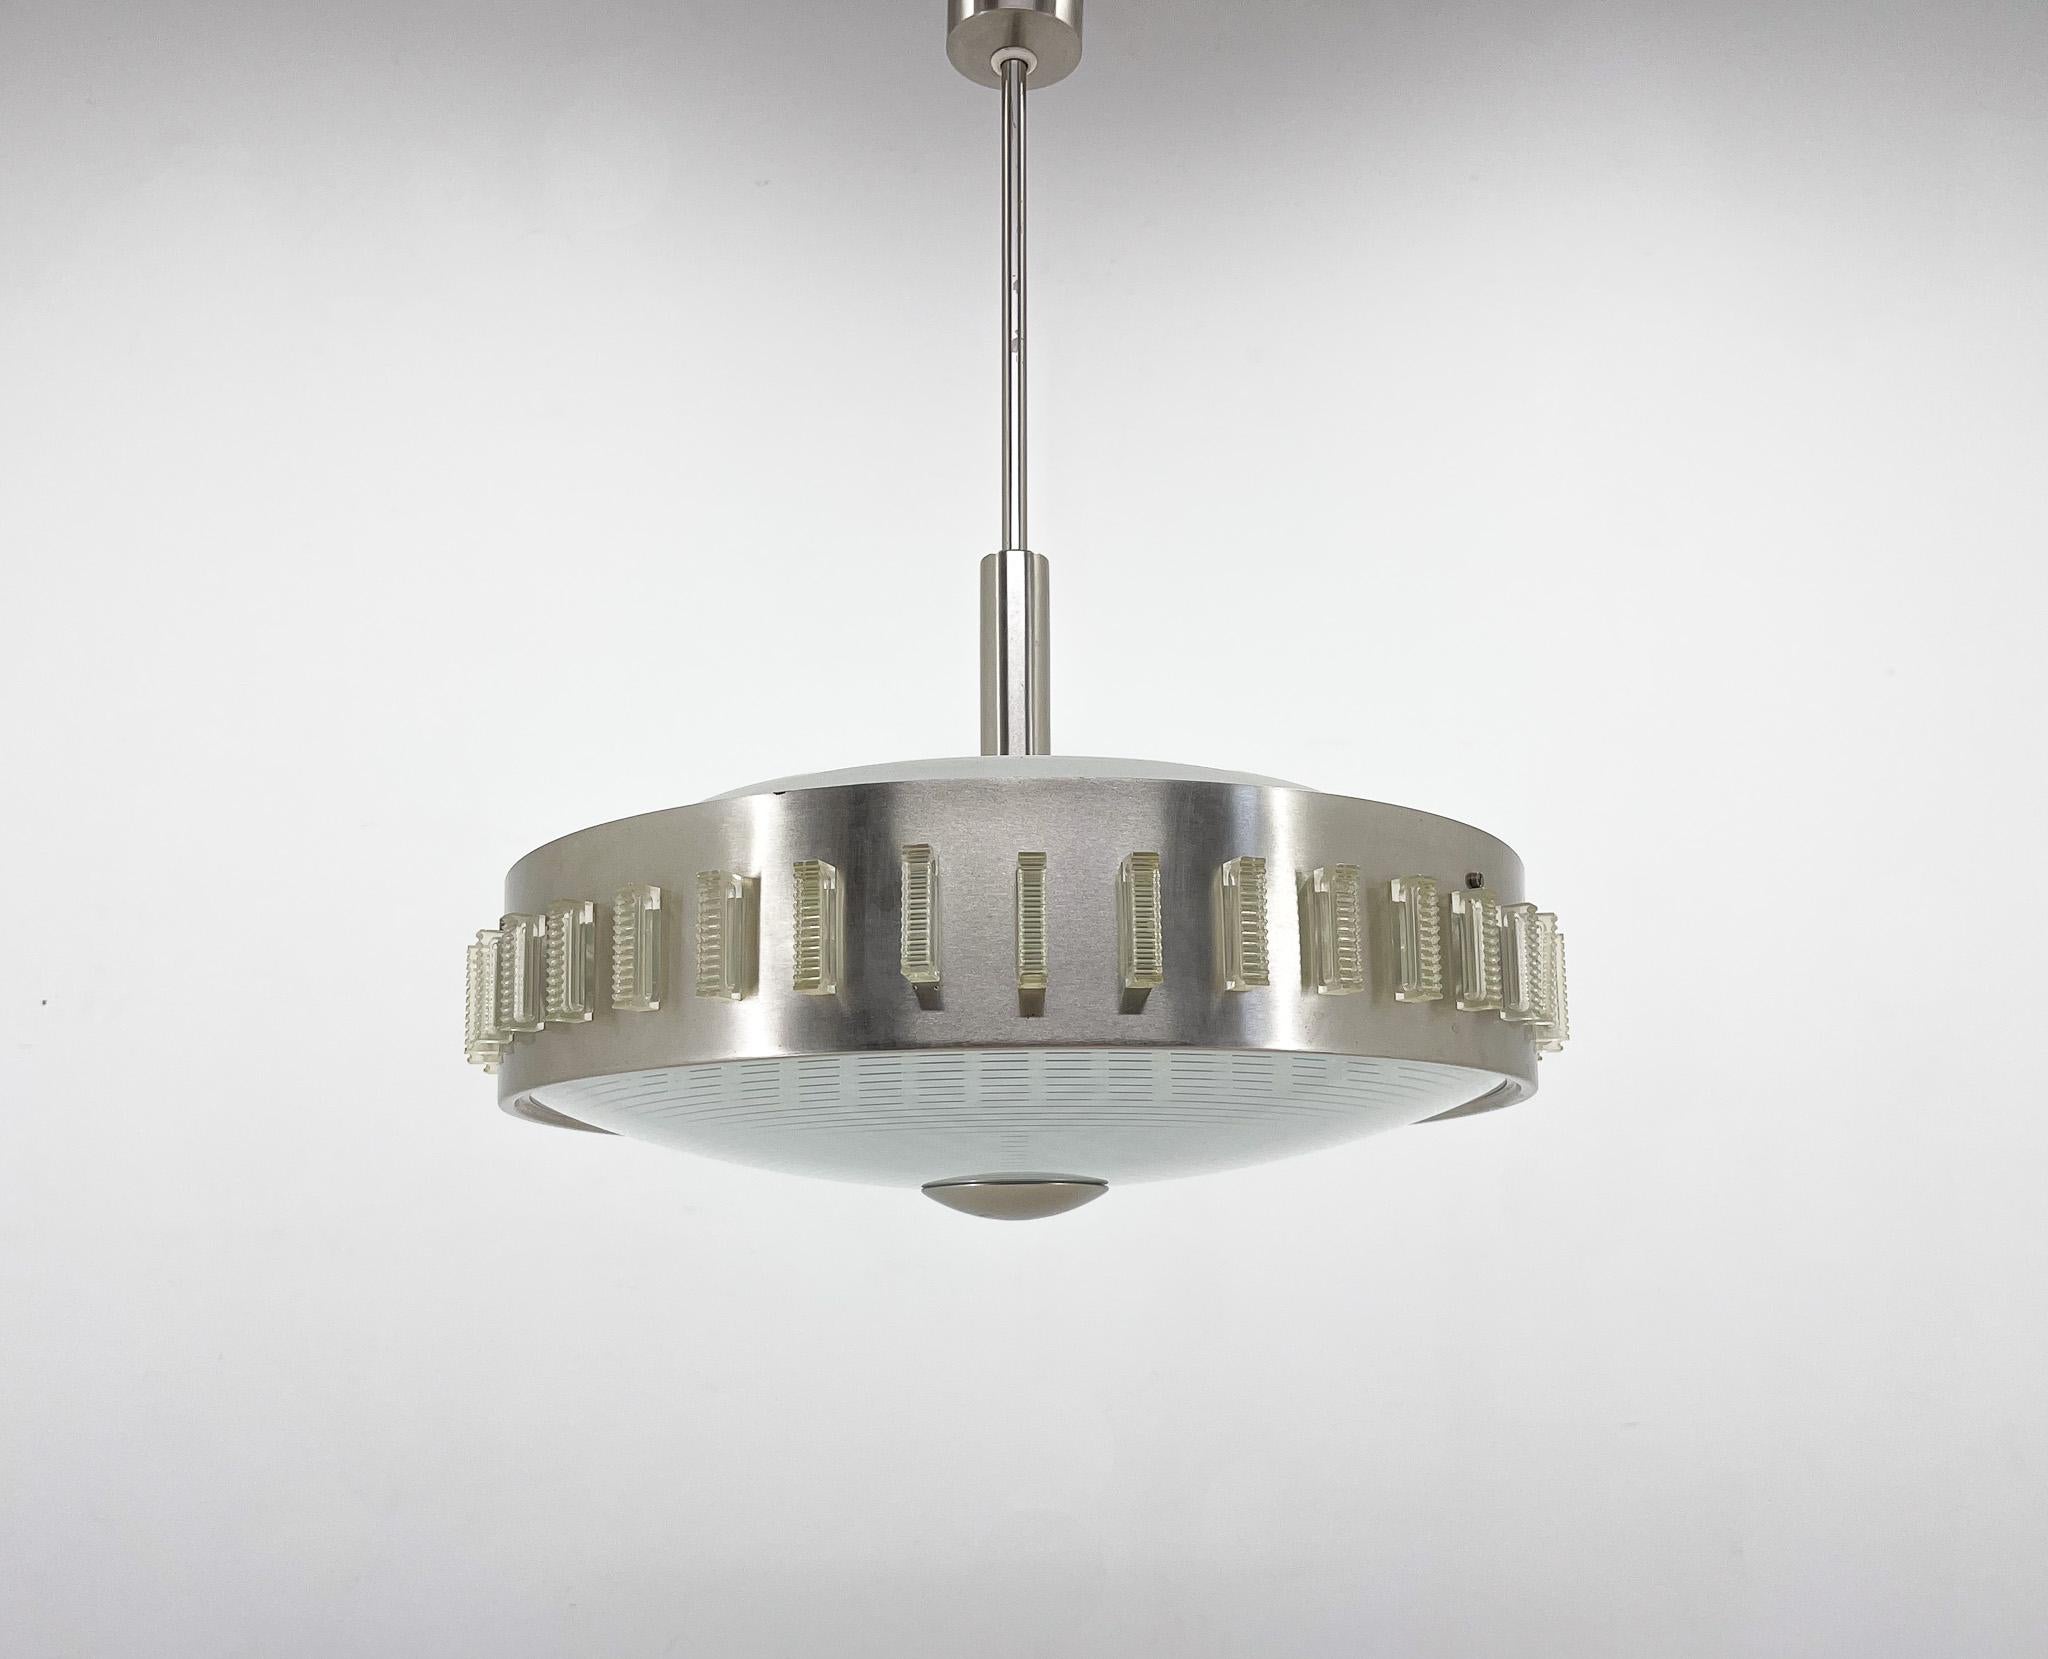 Vintage pendant light made of metal glass and plastic. The plastic vertical rectangles around the perimeter of the chandelier can be easily removed and the light will shine directly through the metal strip.